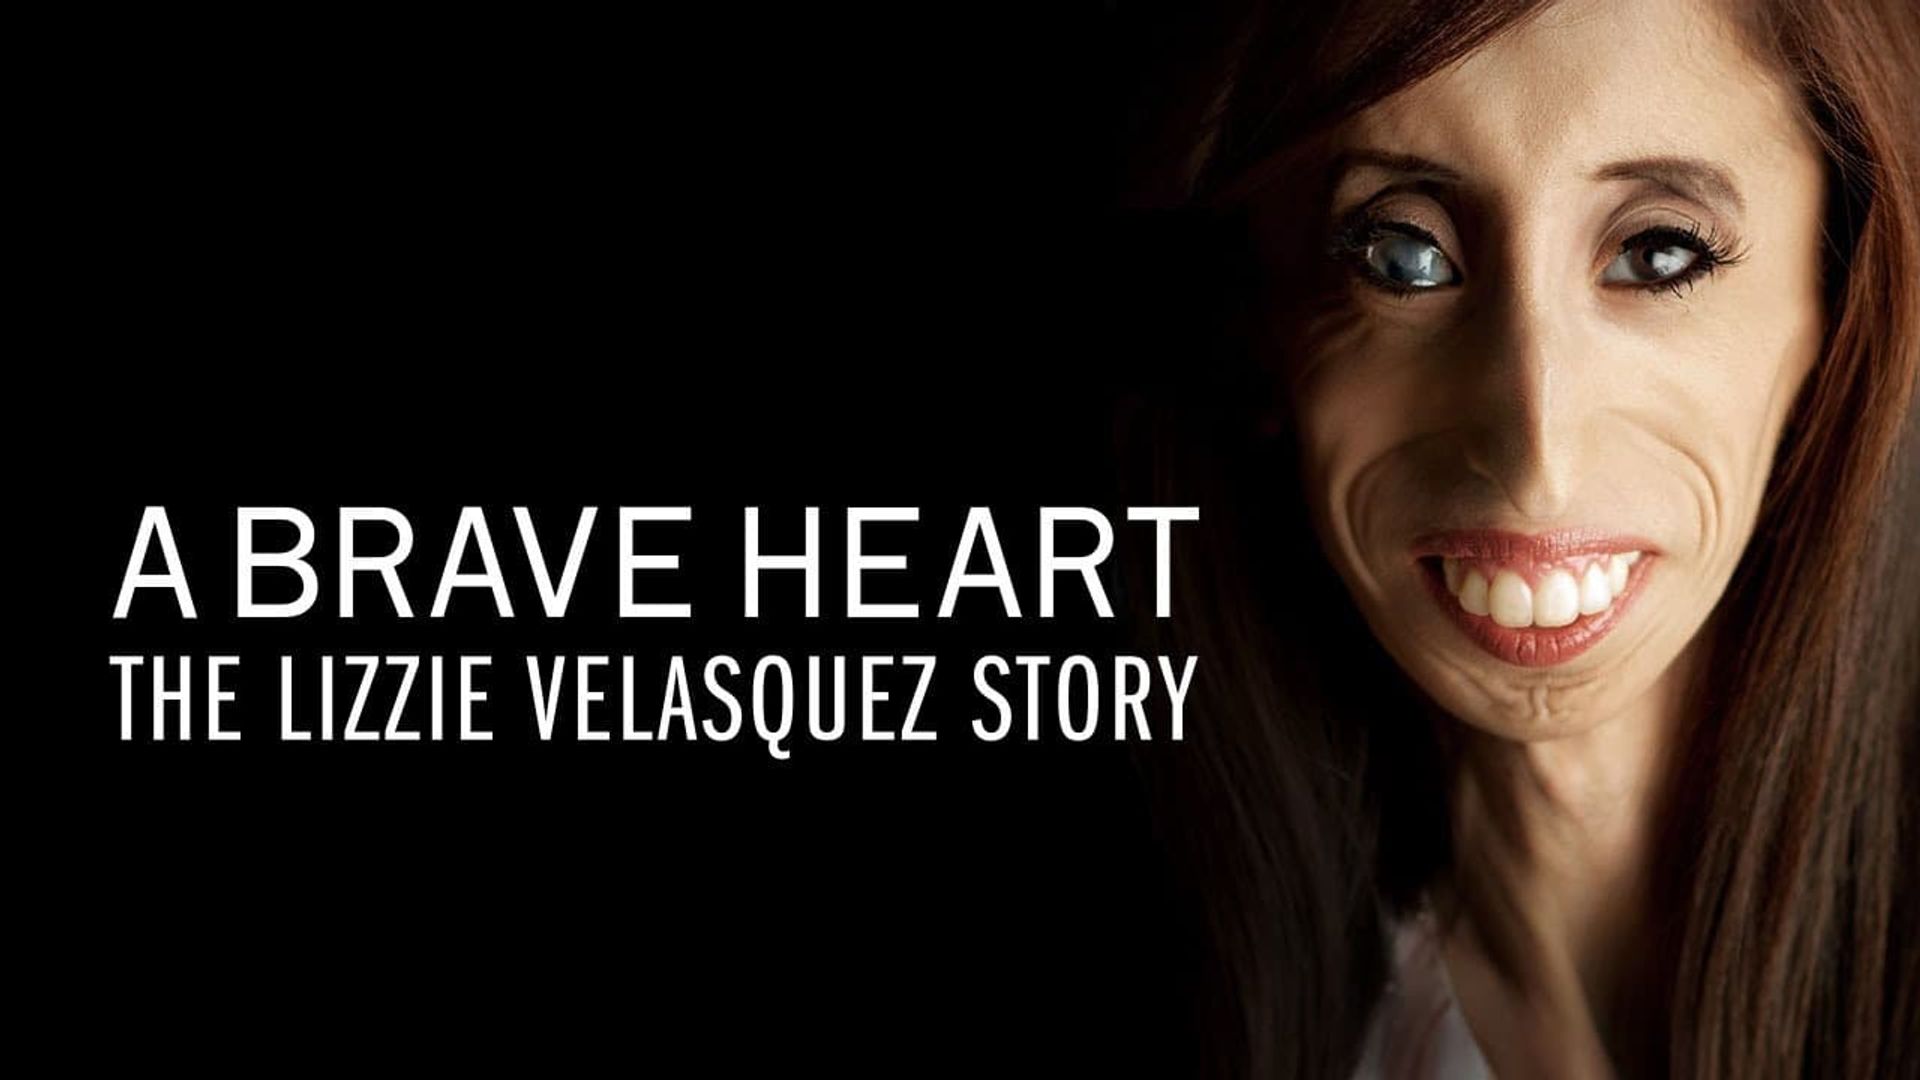 A Brave Heart: The Lizzie Velasquez Story background